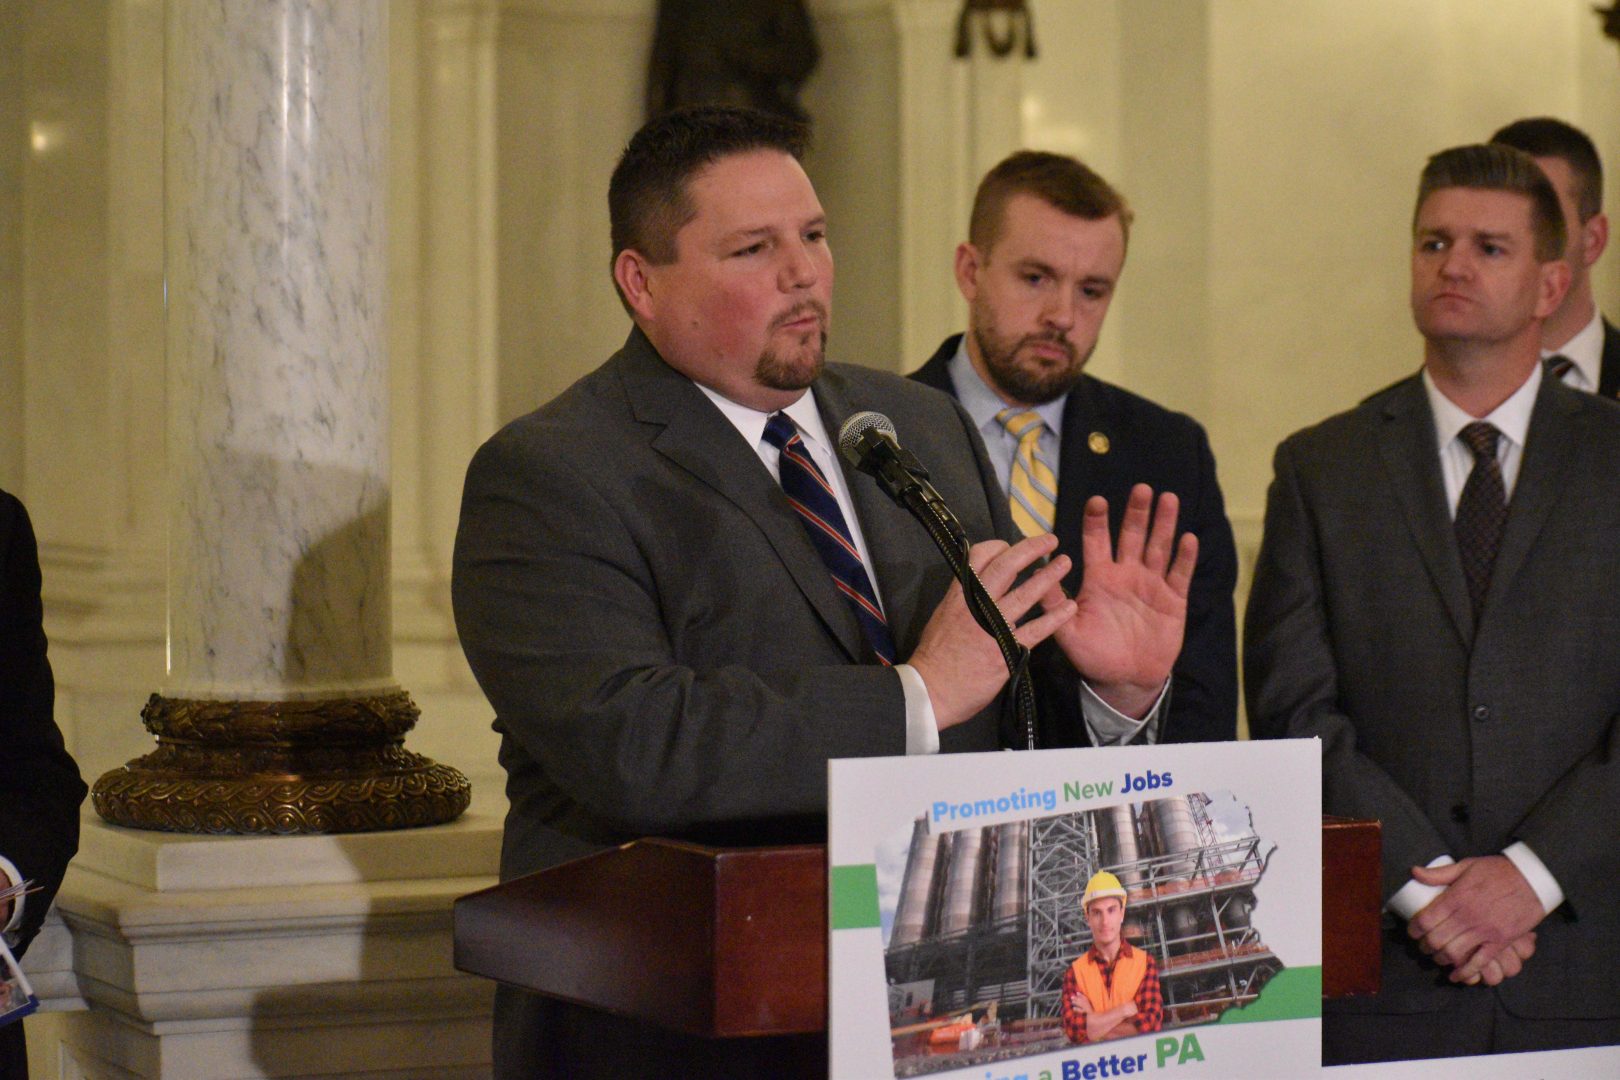 State Rep. Gerald Mullery (D-Luzerne) speaks in support of House Bill 1100 during a news conference at the state Capitol on March 9, 2020.